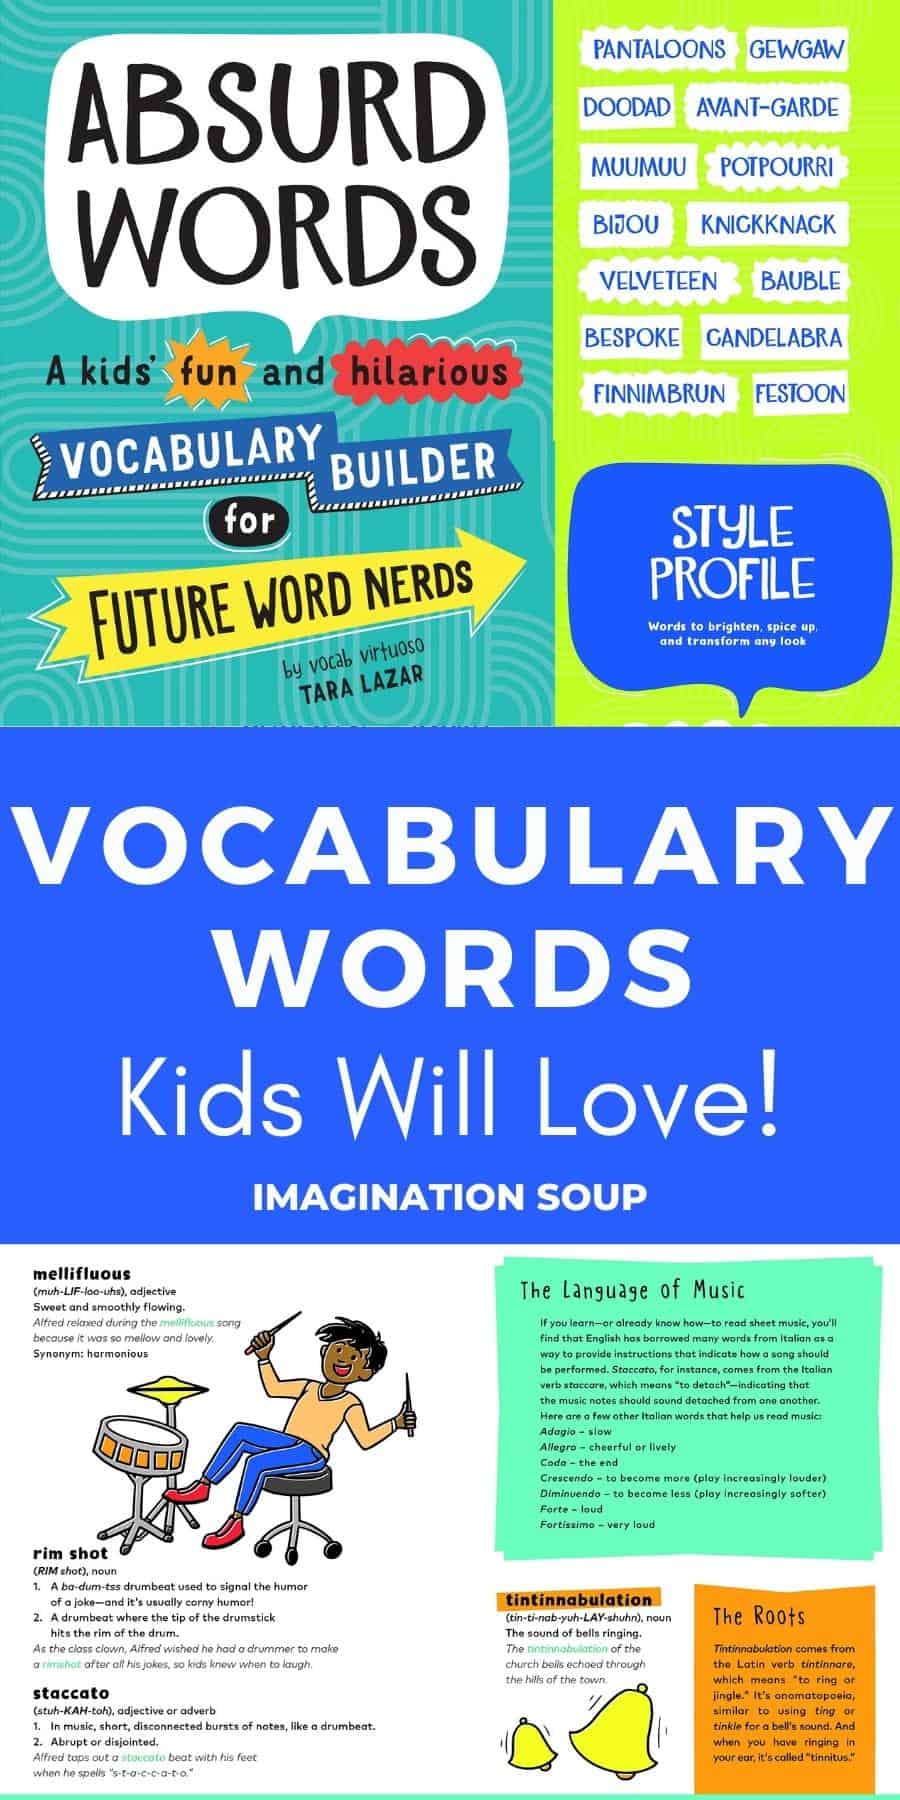 Absurd Words Vocabulary Words for Kids